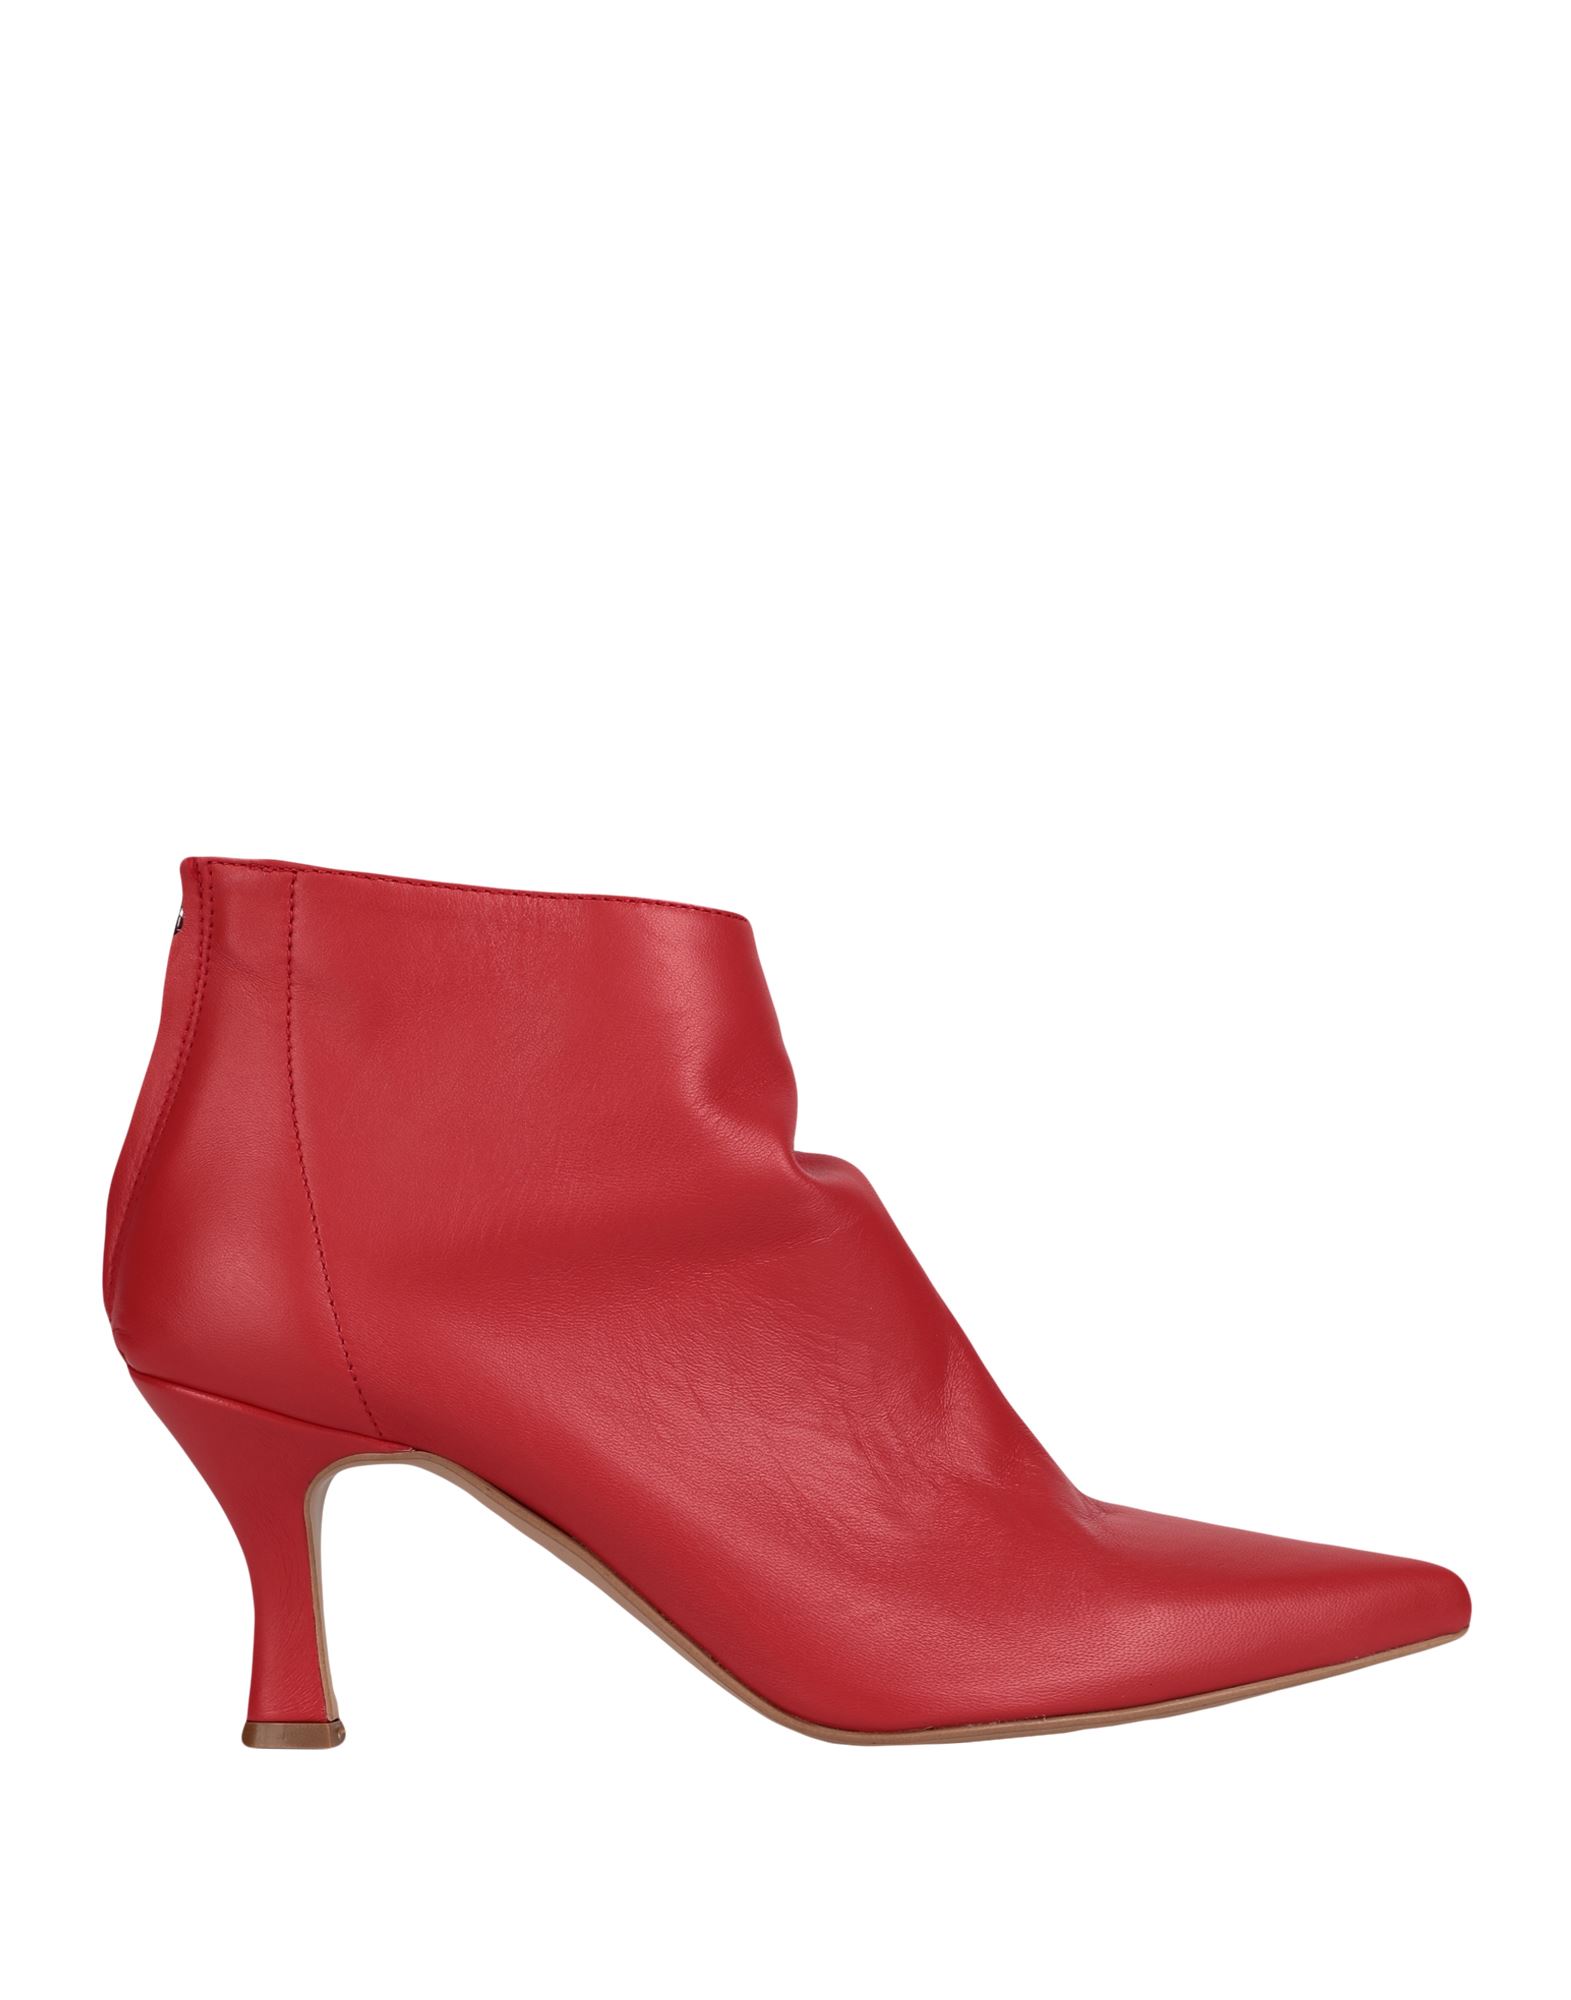 OVYE' BY CRISTINA LUCCHI OVYE' BY CRISTINA LUCCHI WOMAN ANKLE BOOTS CORAL SIZE 7 CALFSKIN